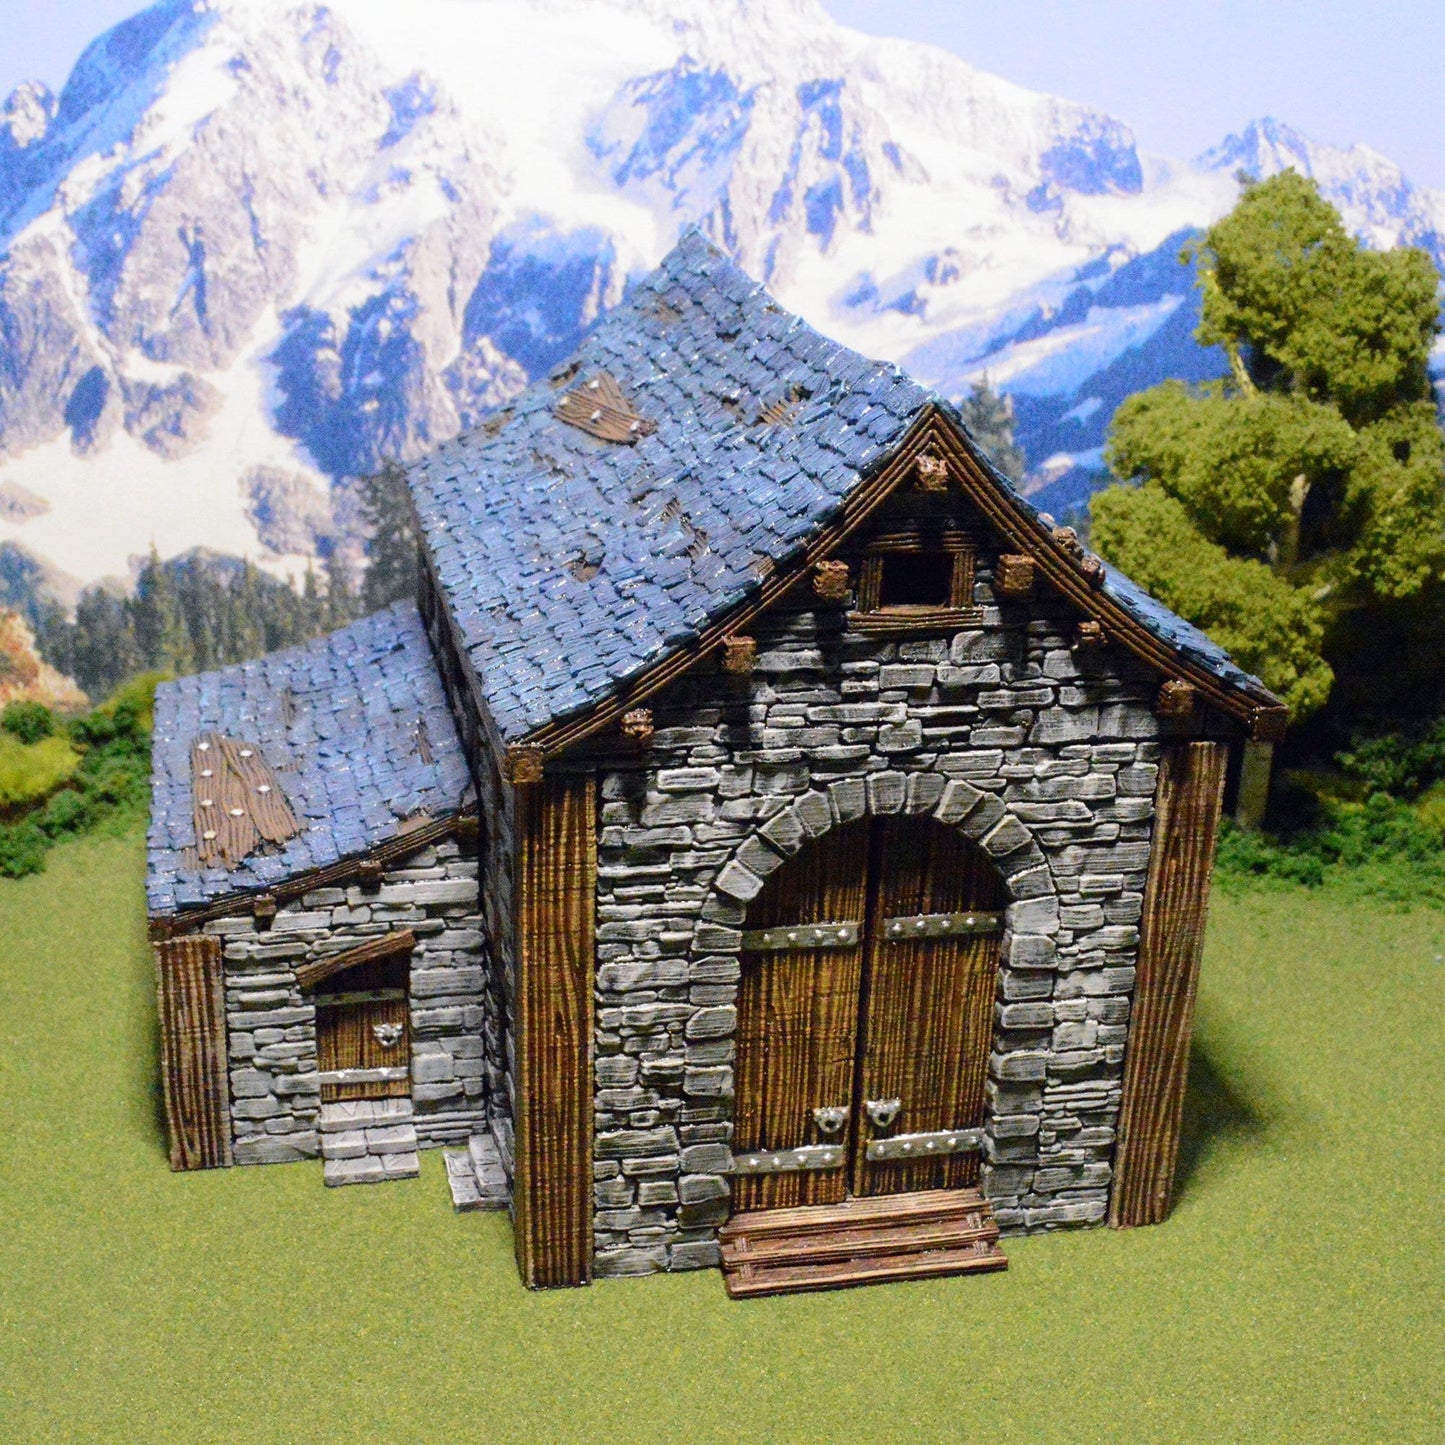 DnD Miniature Stone Barn 28mm, Modular OpenLOCK Building, D&D Pathfinder Medieval Terrain, Gift for Tabletop Gamers